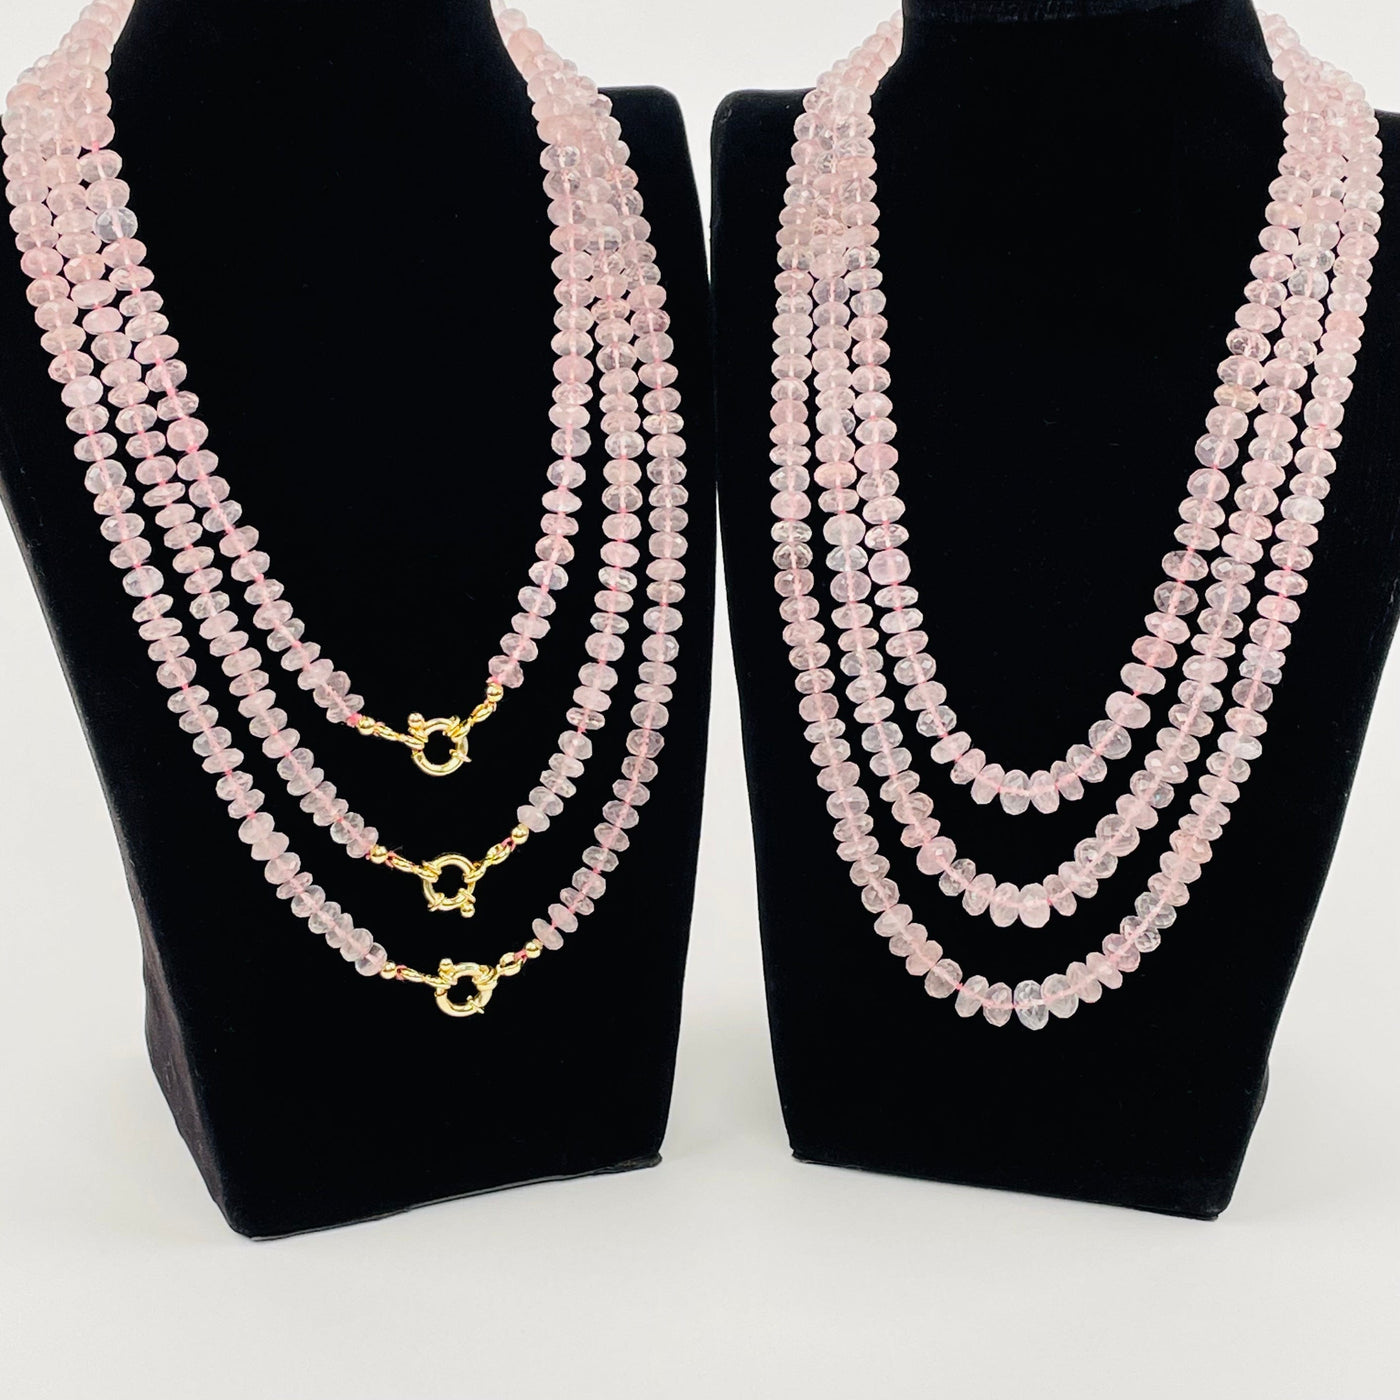 faceted rose quartz necklaces displayed to show the clasp side and back side 